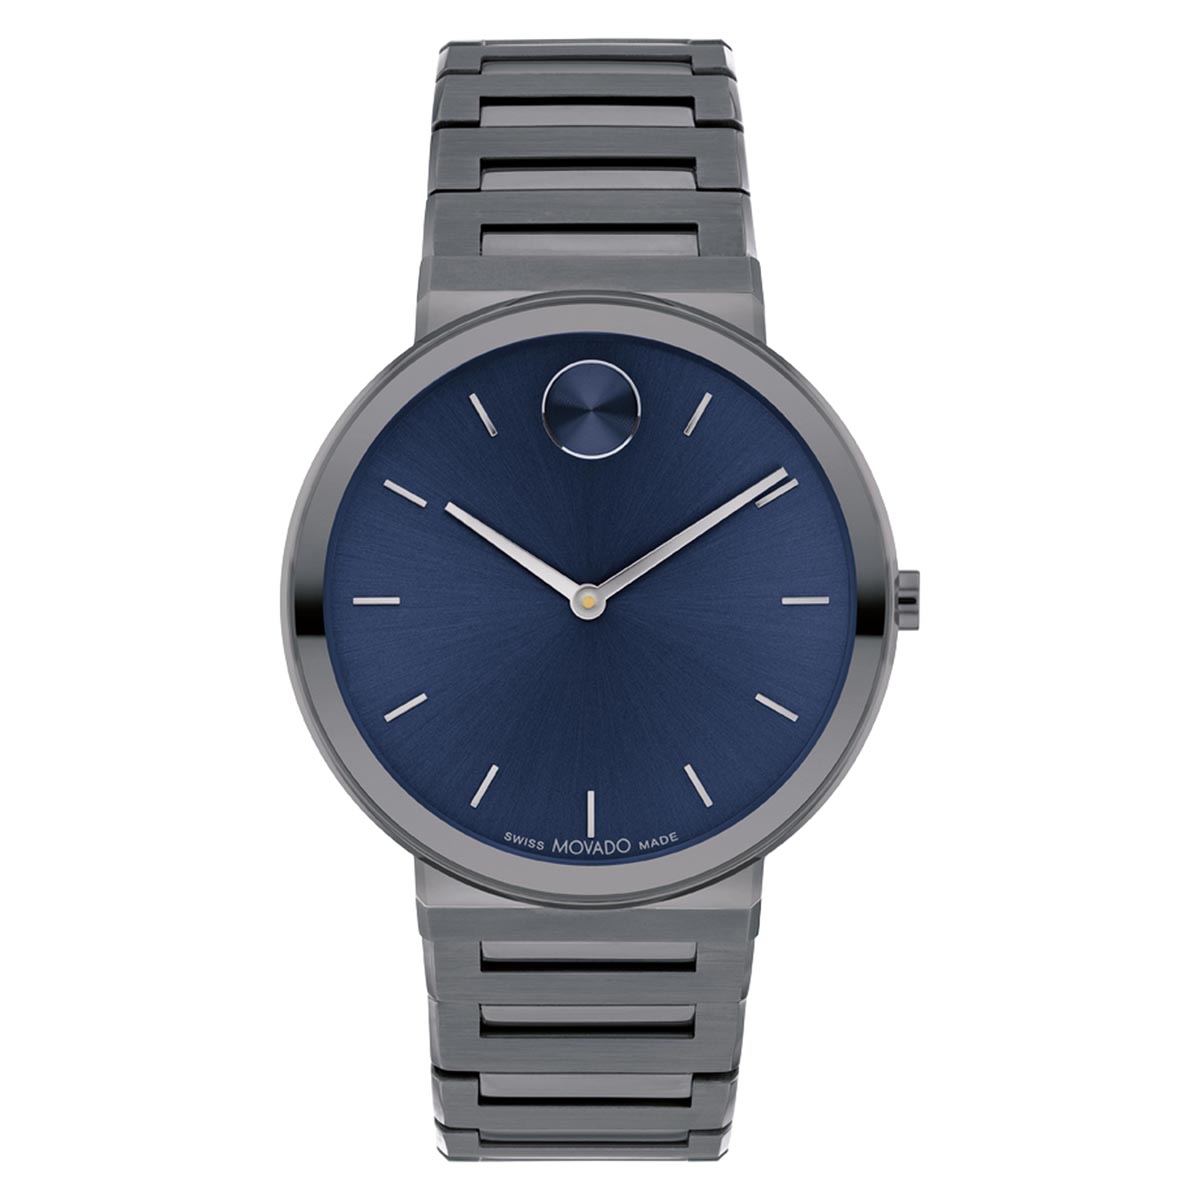 Movado Bold Horizon Mens Watch with Navy Dial and Gray Ion Plated Bracelet (Swiss quartz movement)